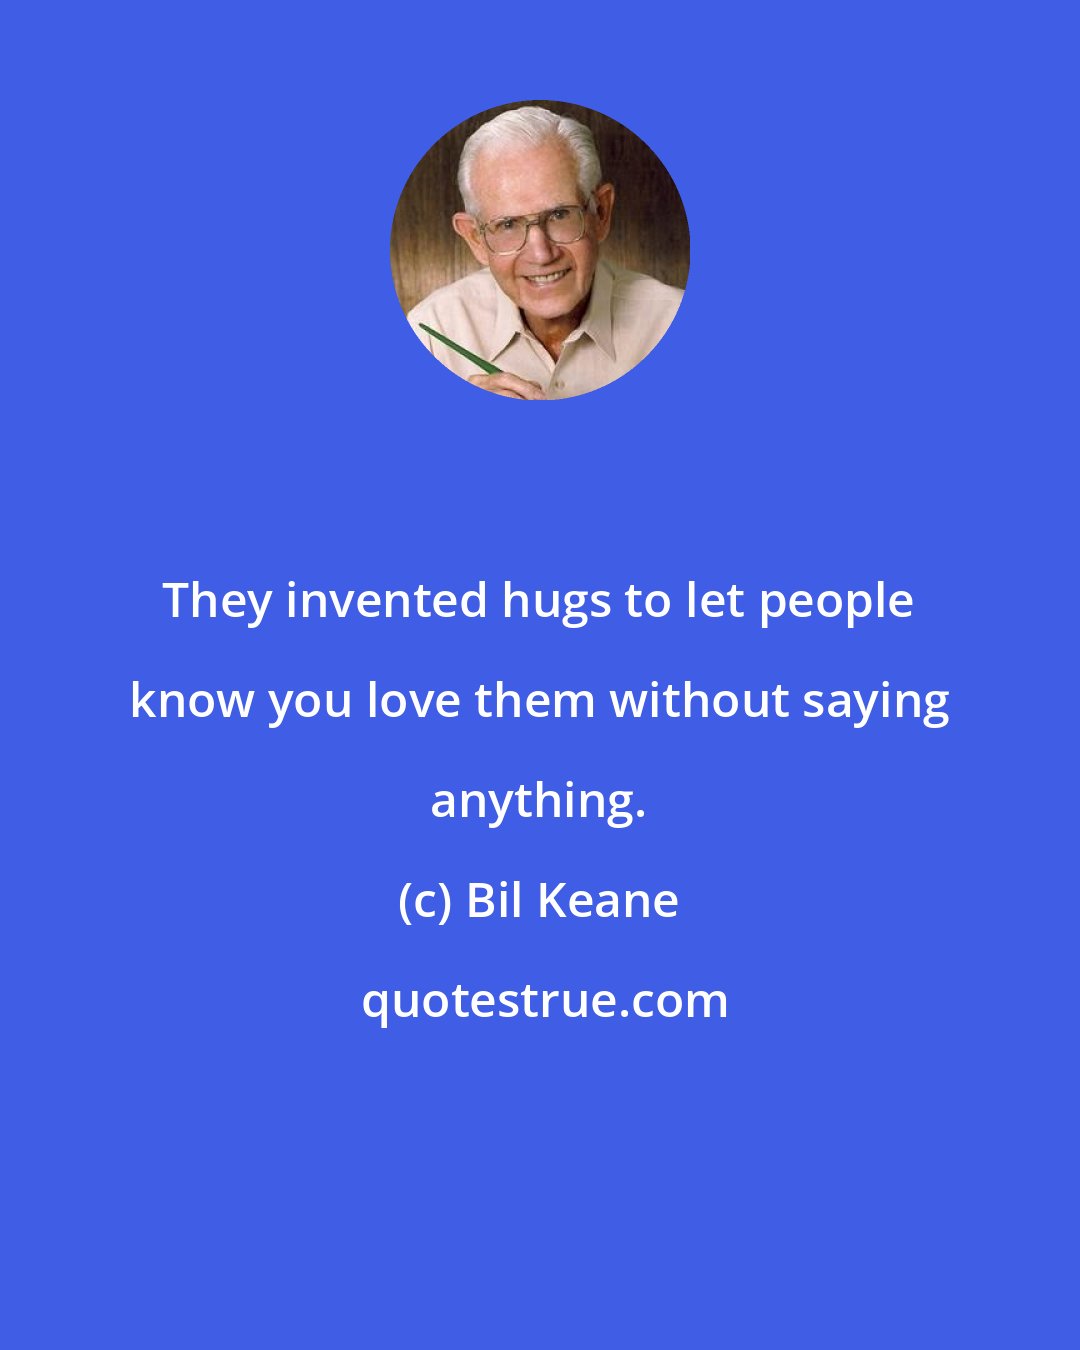 Bil Keane: They invented hugs to let people know you love them without saying anything.